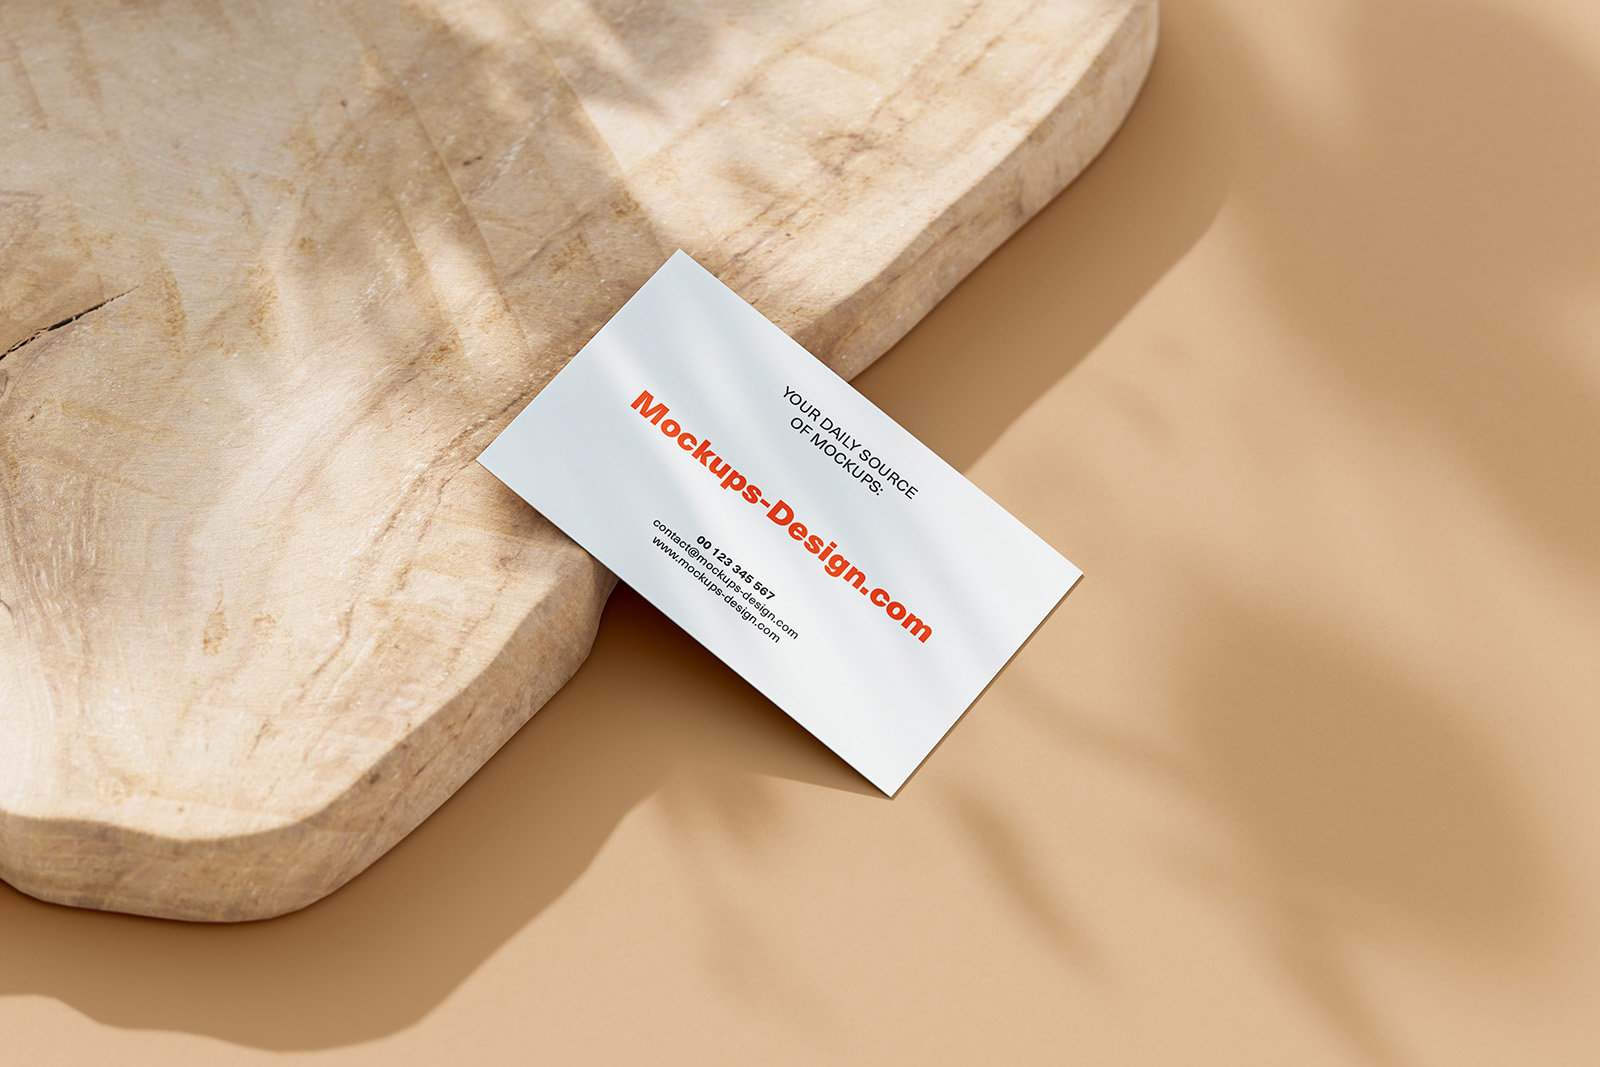 Various Views of 4 Business Cards Mockups on Piece of Wood FREE PSD